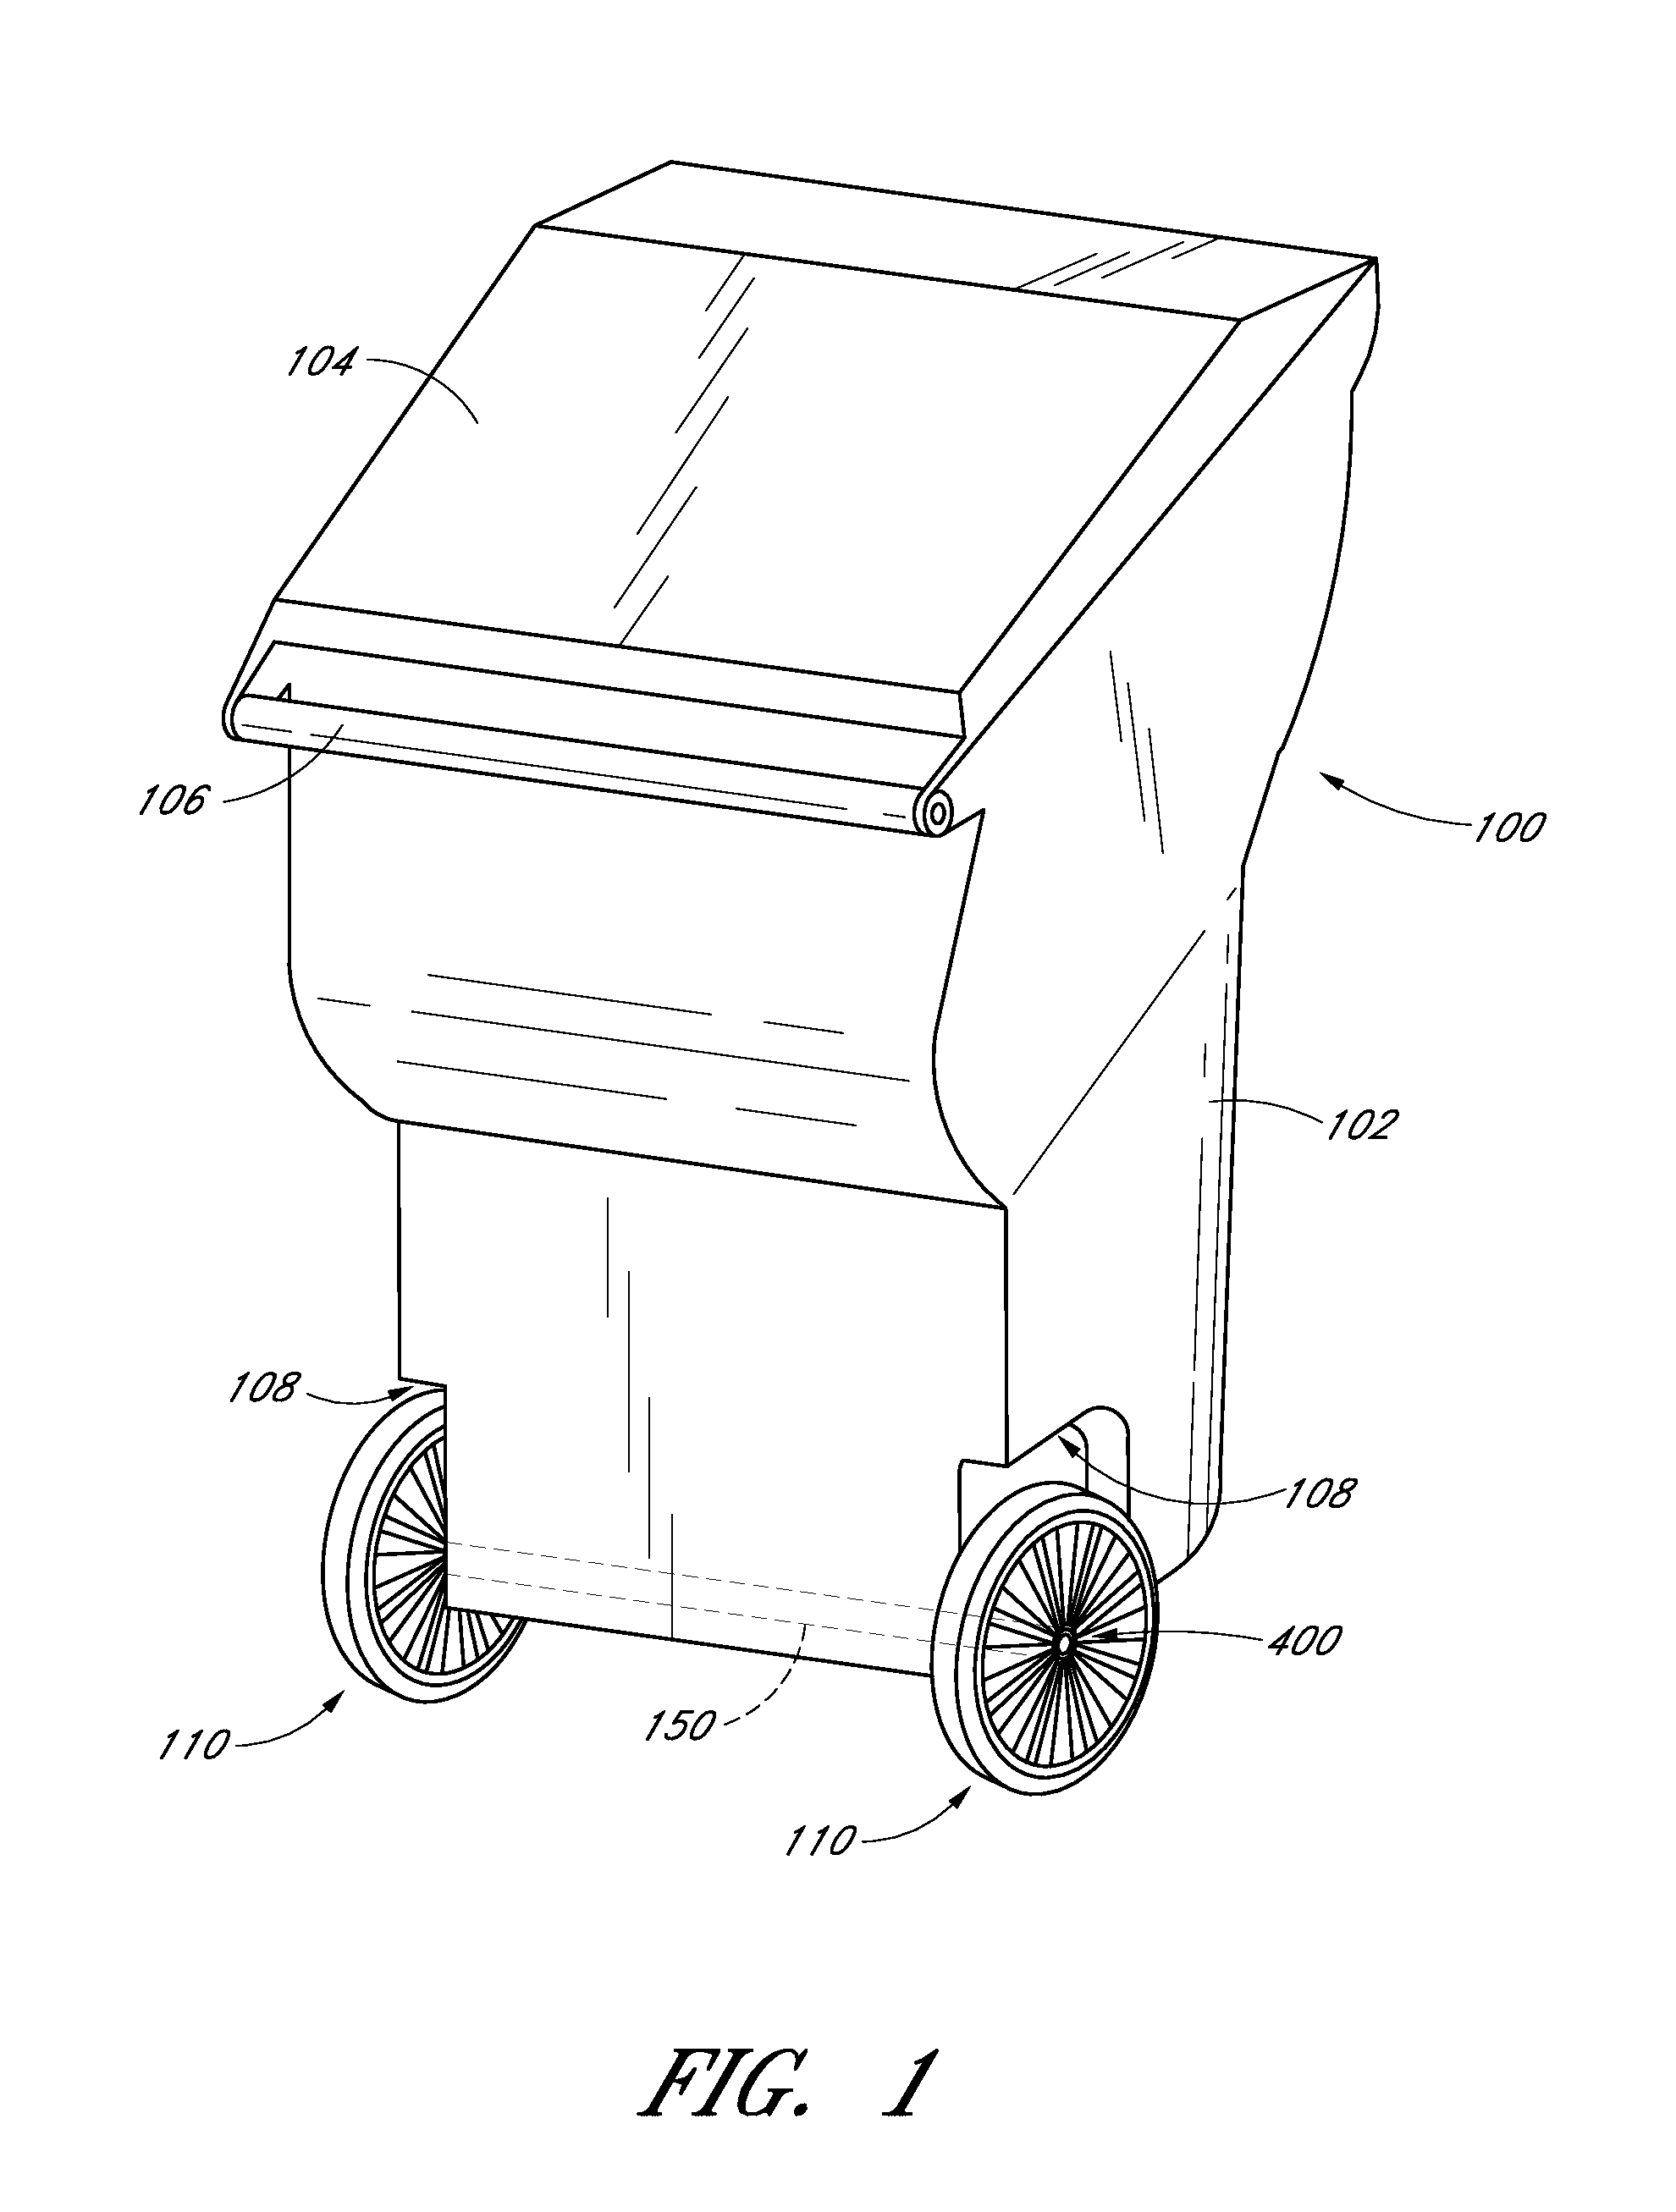 Wheel and hub assembly